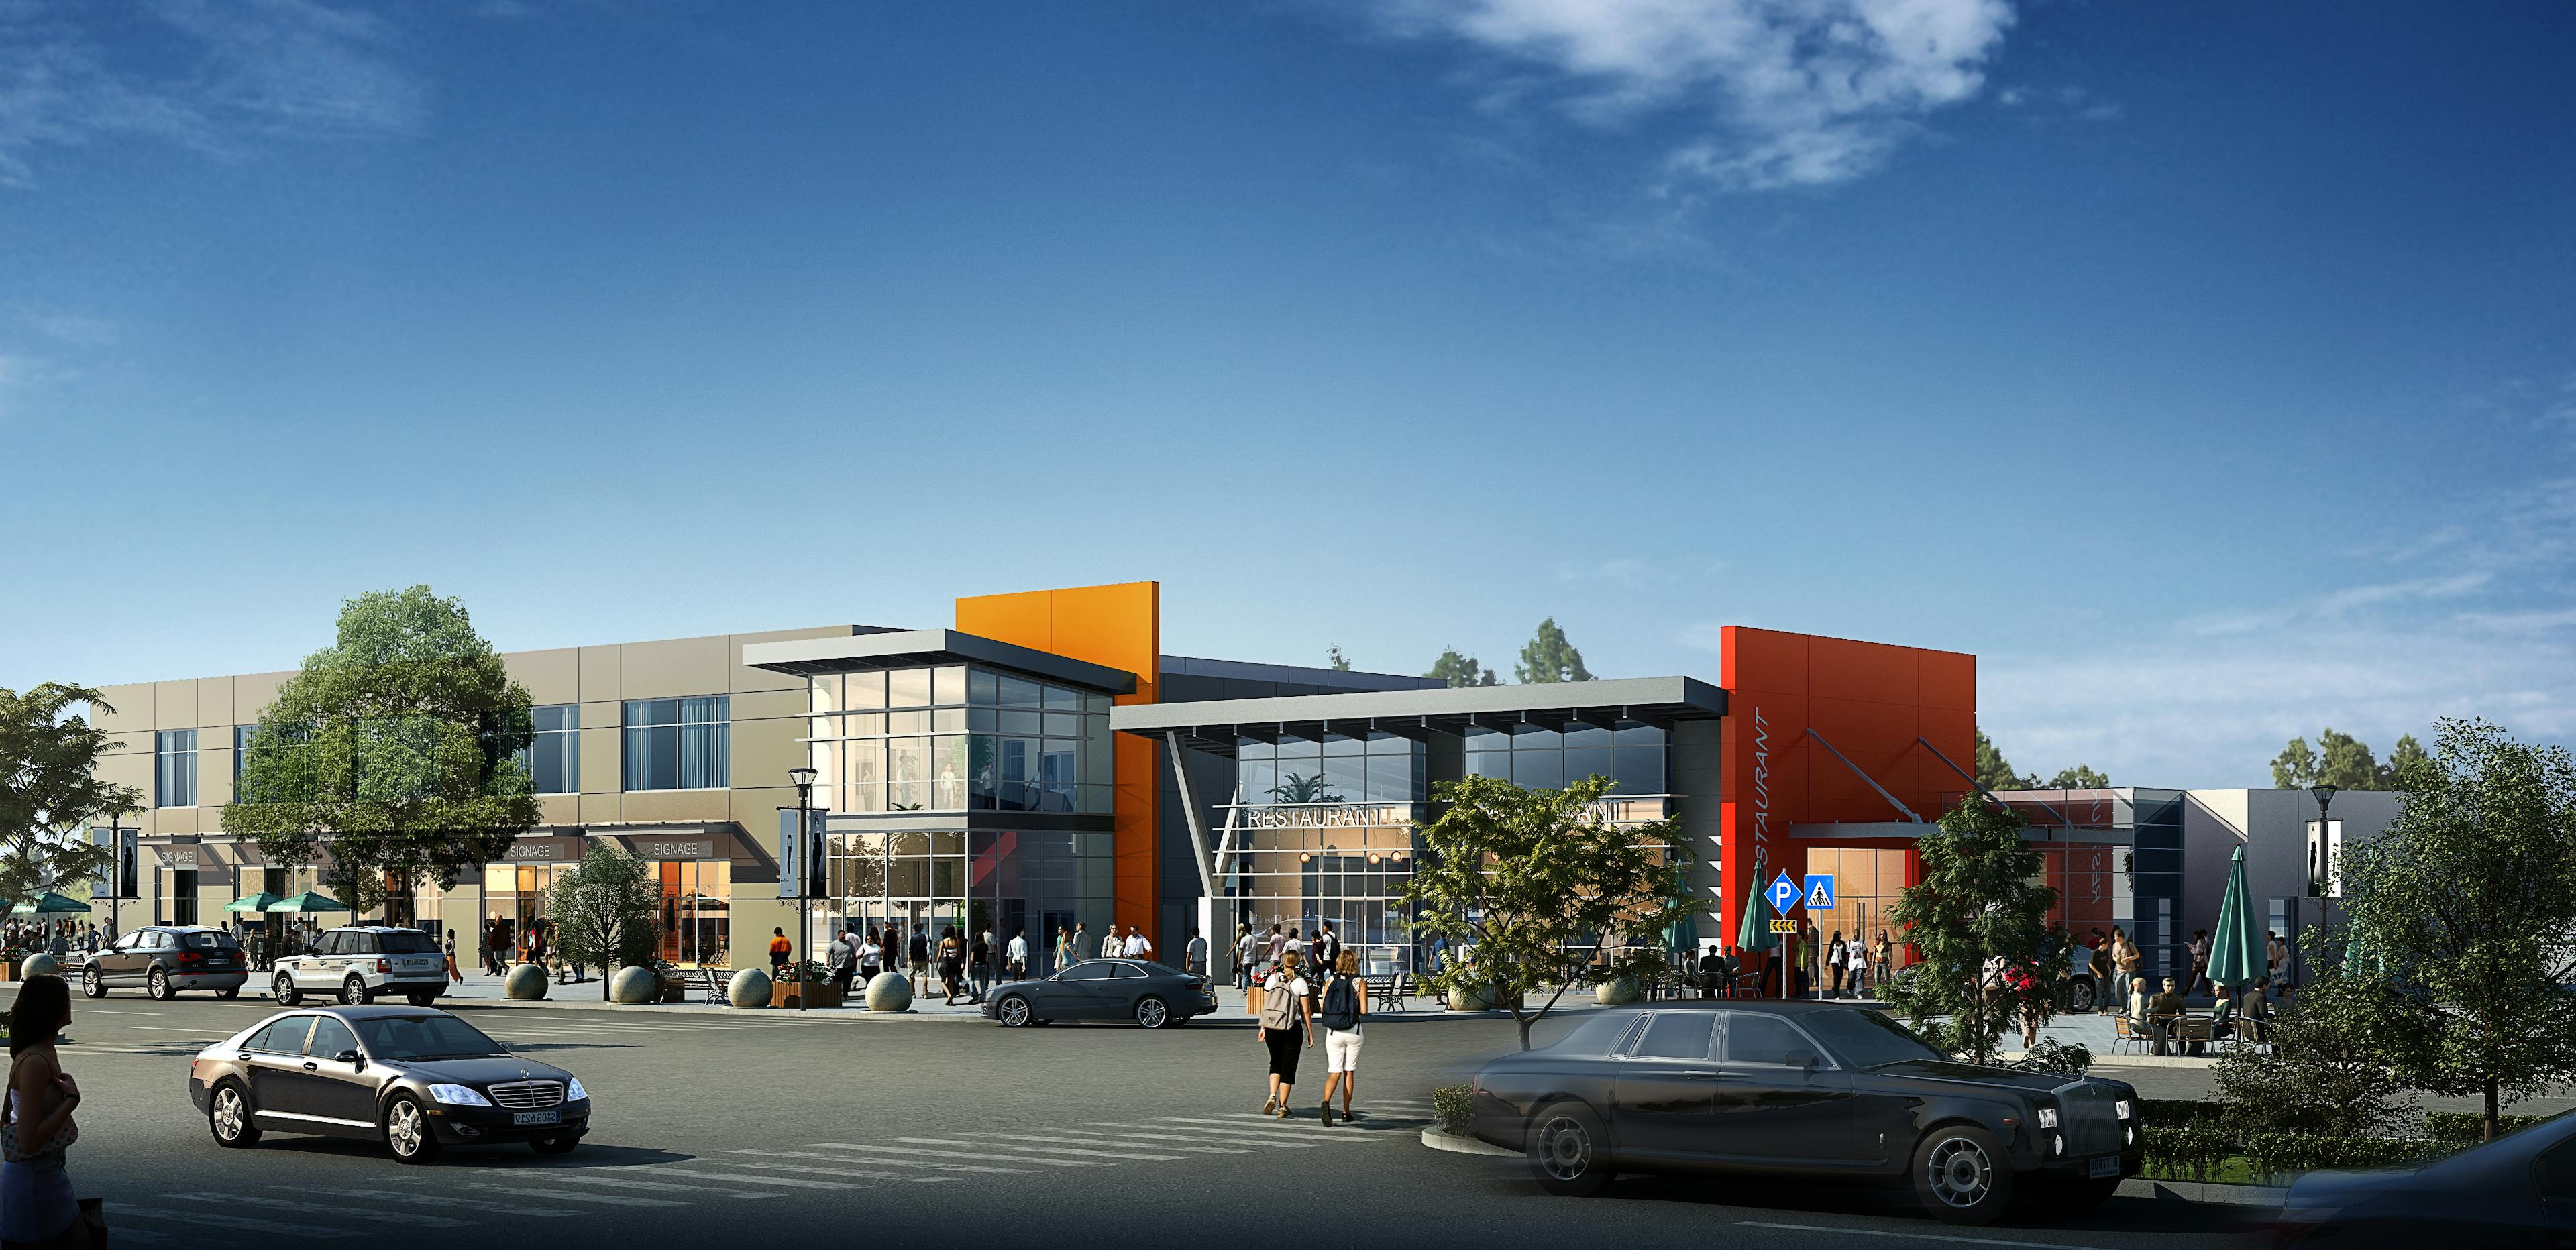 Elgin Park: commerical retail and office spaces in South Surrey